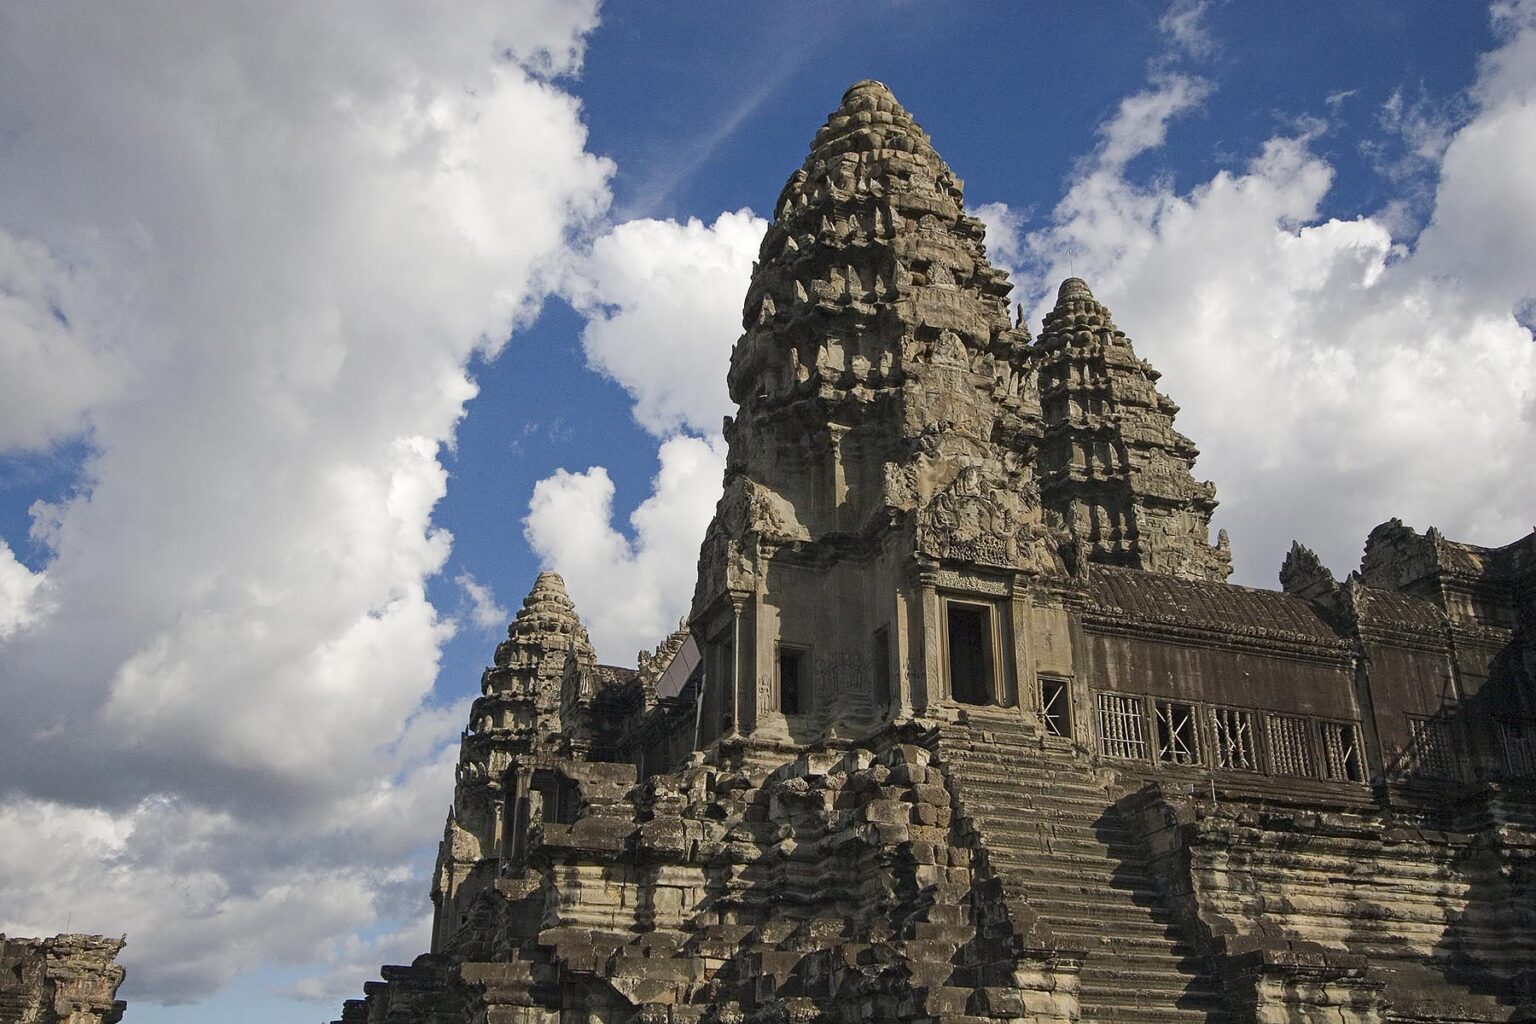 Stone temples representing the five peaks of Mount Meru at Angkor Wat, built in the 11th century by Suryavarman the 2nd - Cambodia